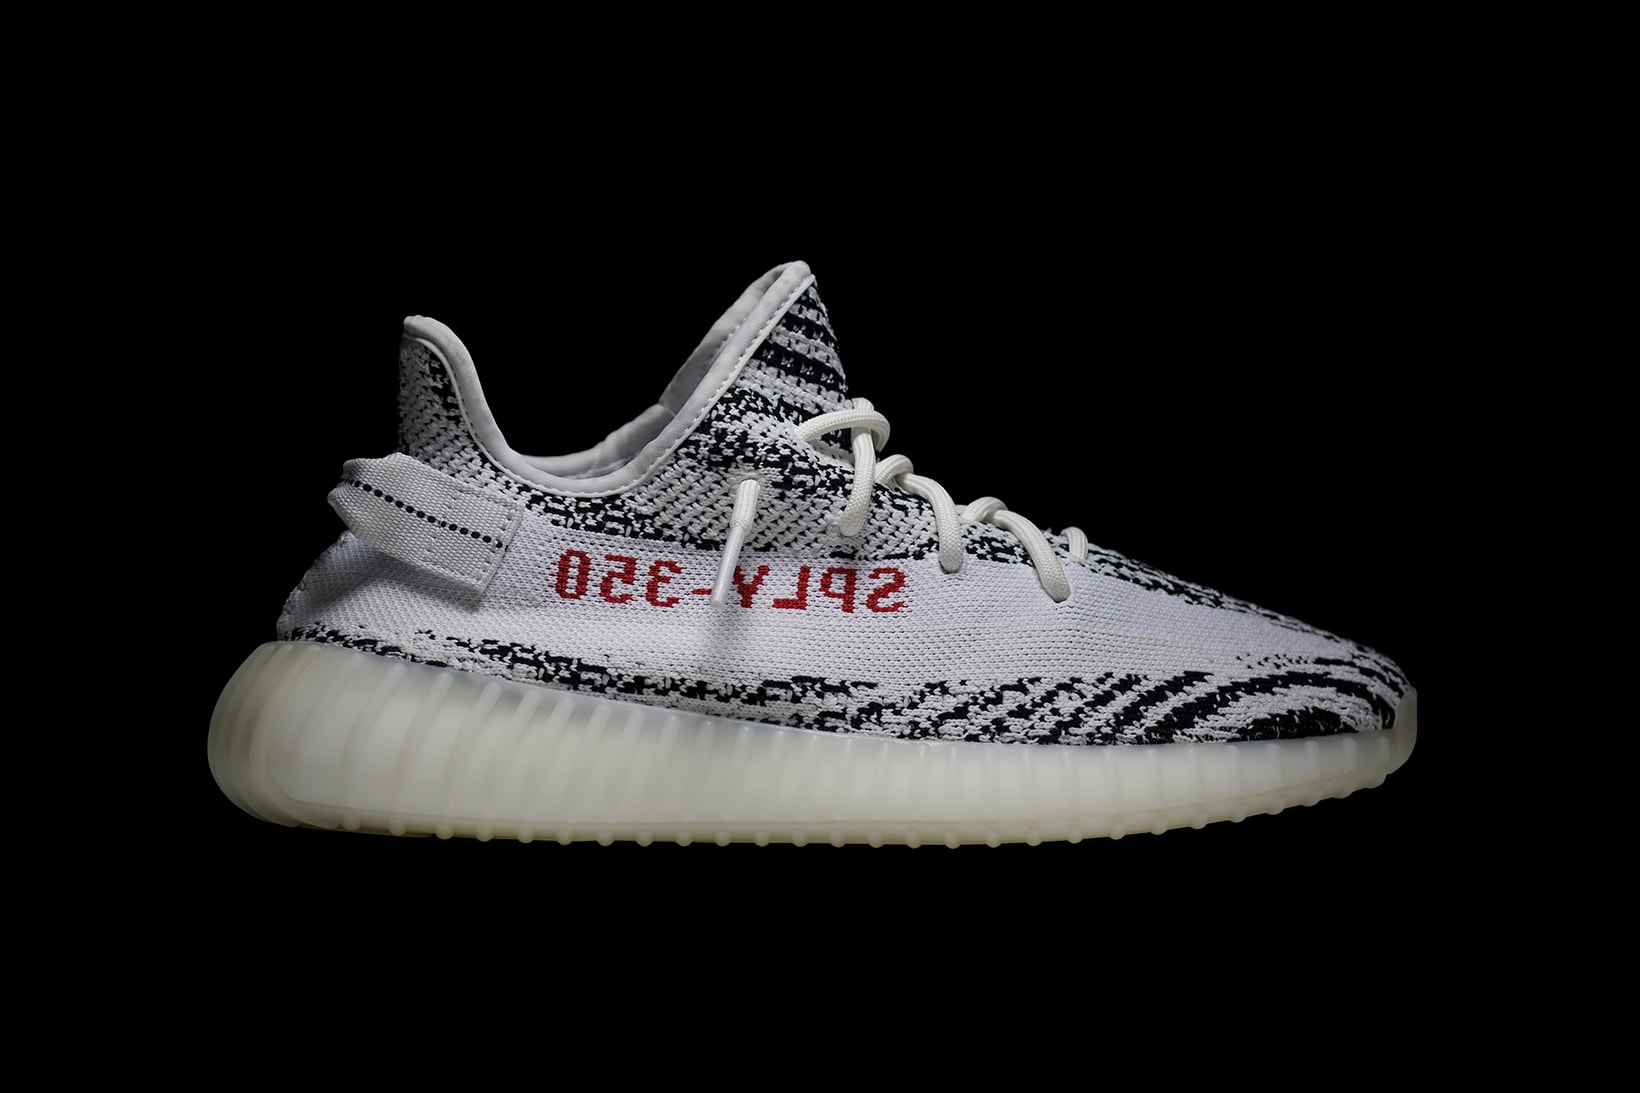 adidas Originals YEEZY BOOST 350 V2 Zebra Available at GOAT side profile